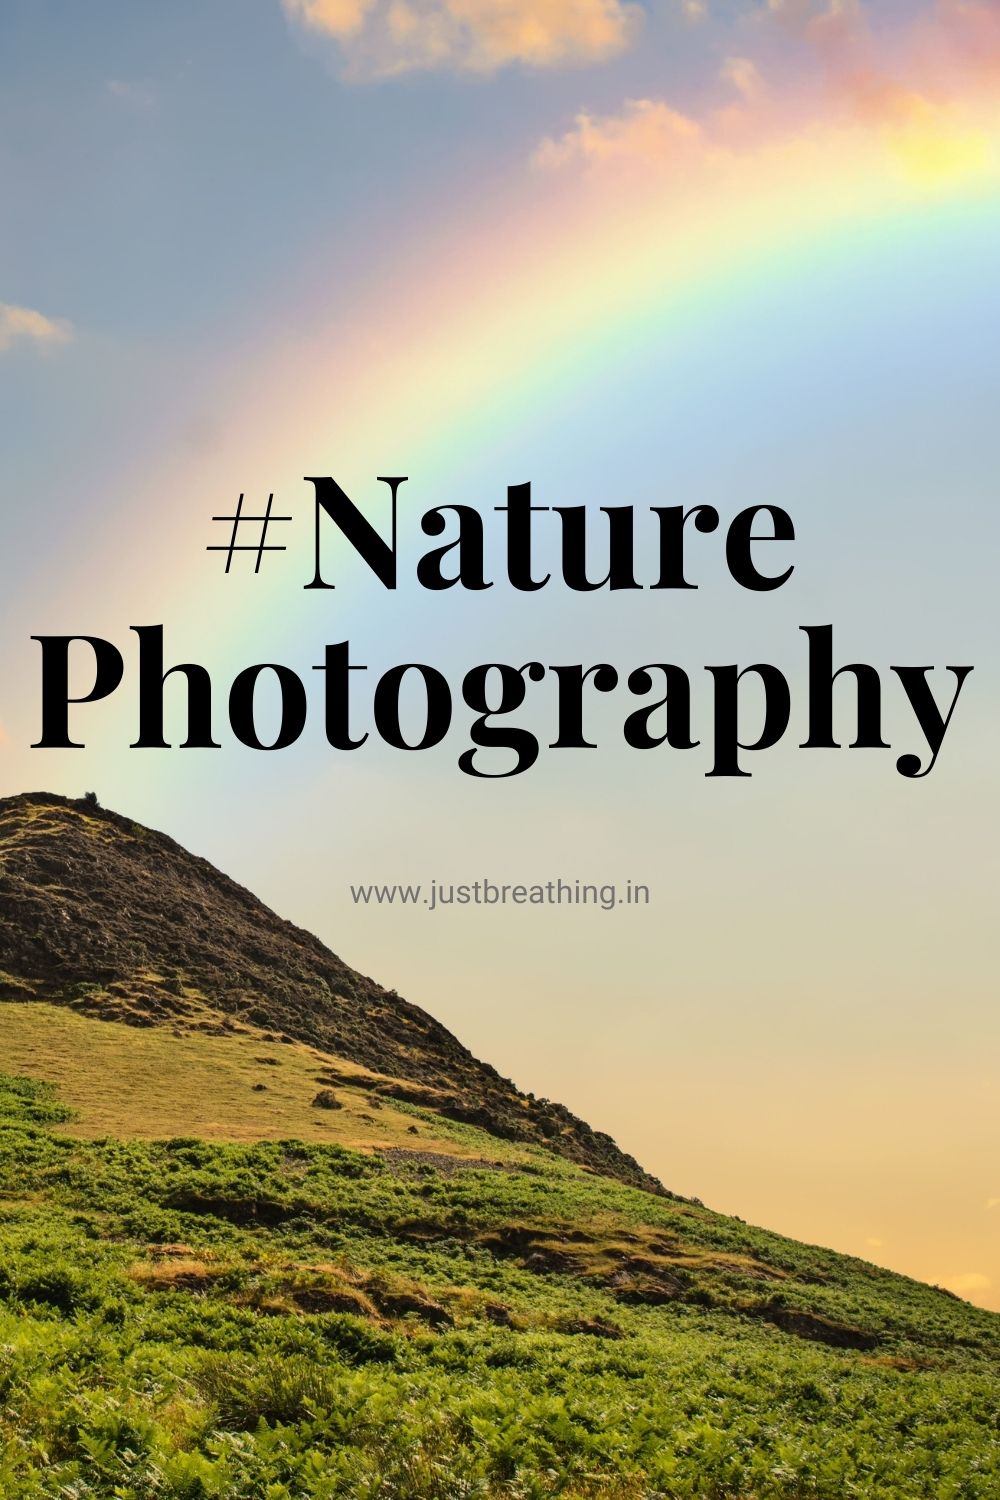 Best Nature photography hashtags for Instagram and hashtags for Nature #Naturephotography